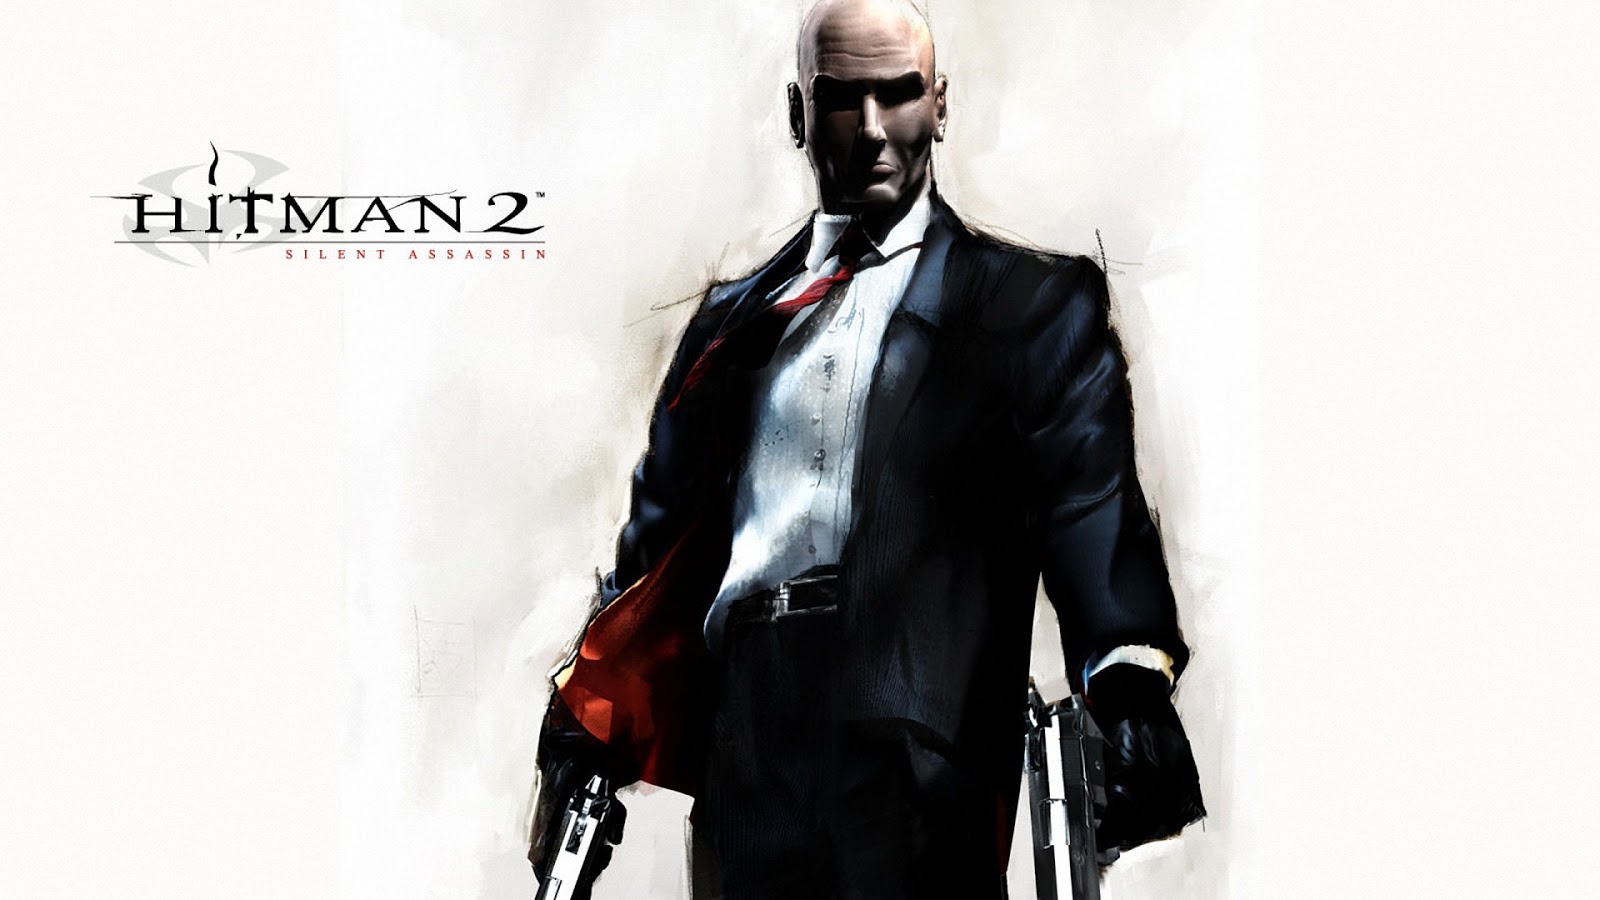 hitman 2 silent assassin game free download for pc